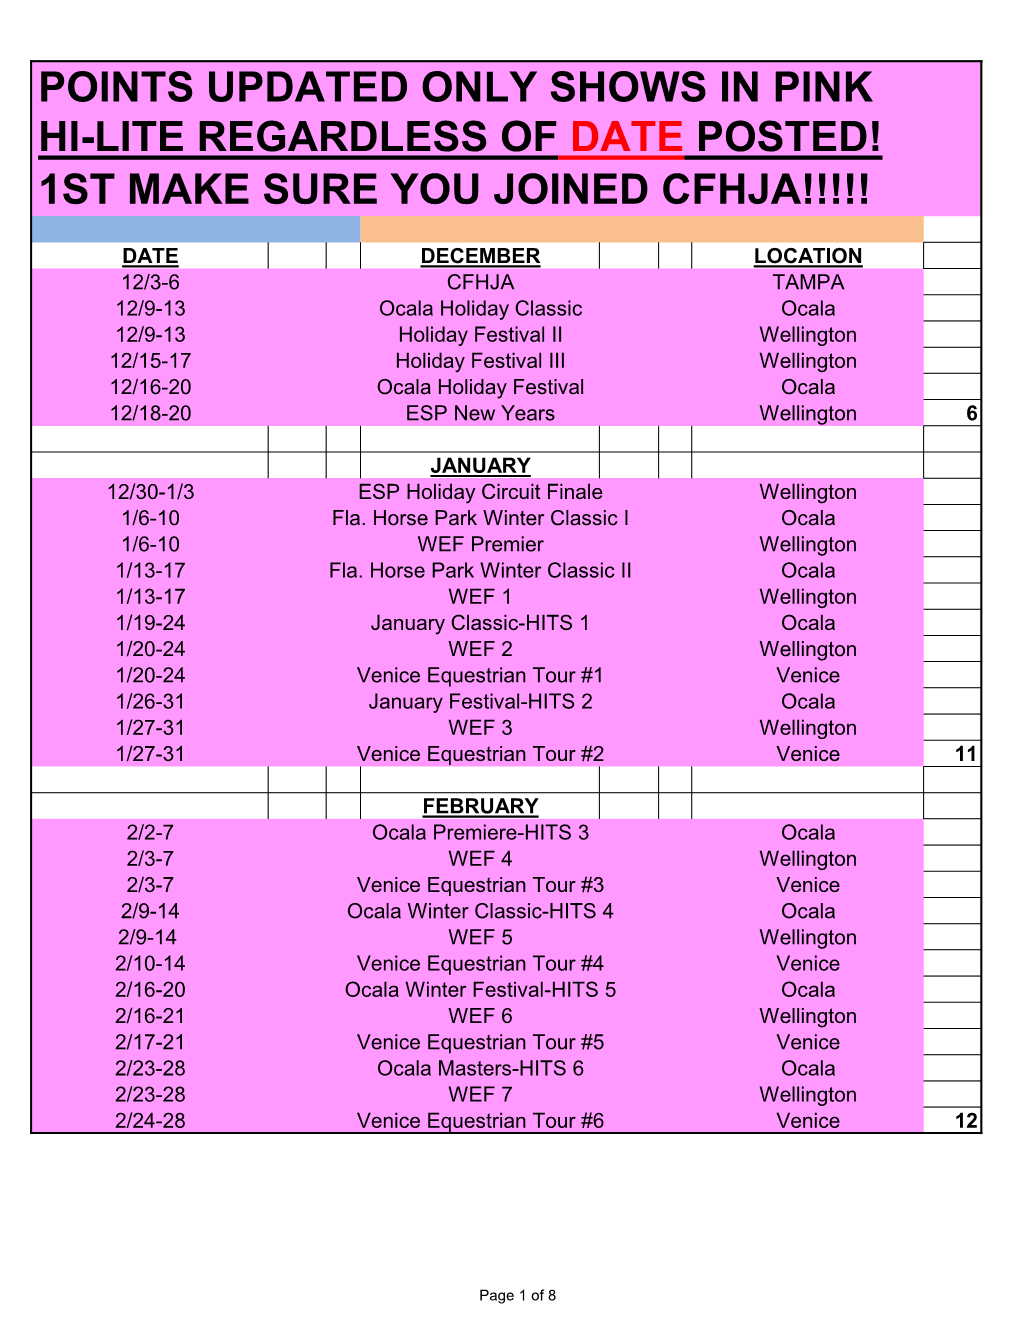 Points Updated Only Shows in Pink Hi-Lite Regardless of Date Posted! 1St Make Sure You Joined Cfhja!!!!!